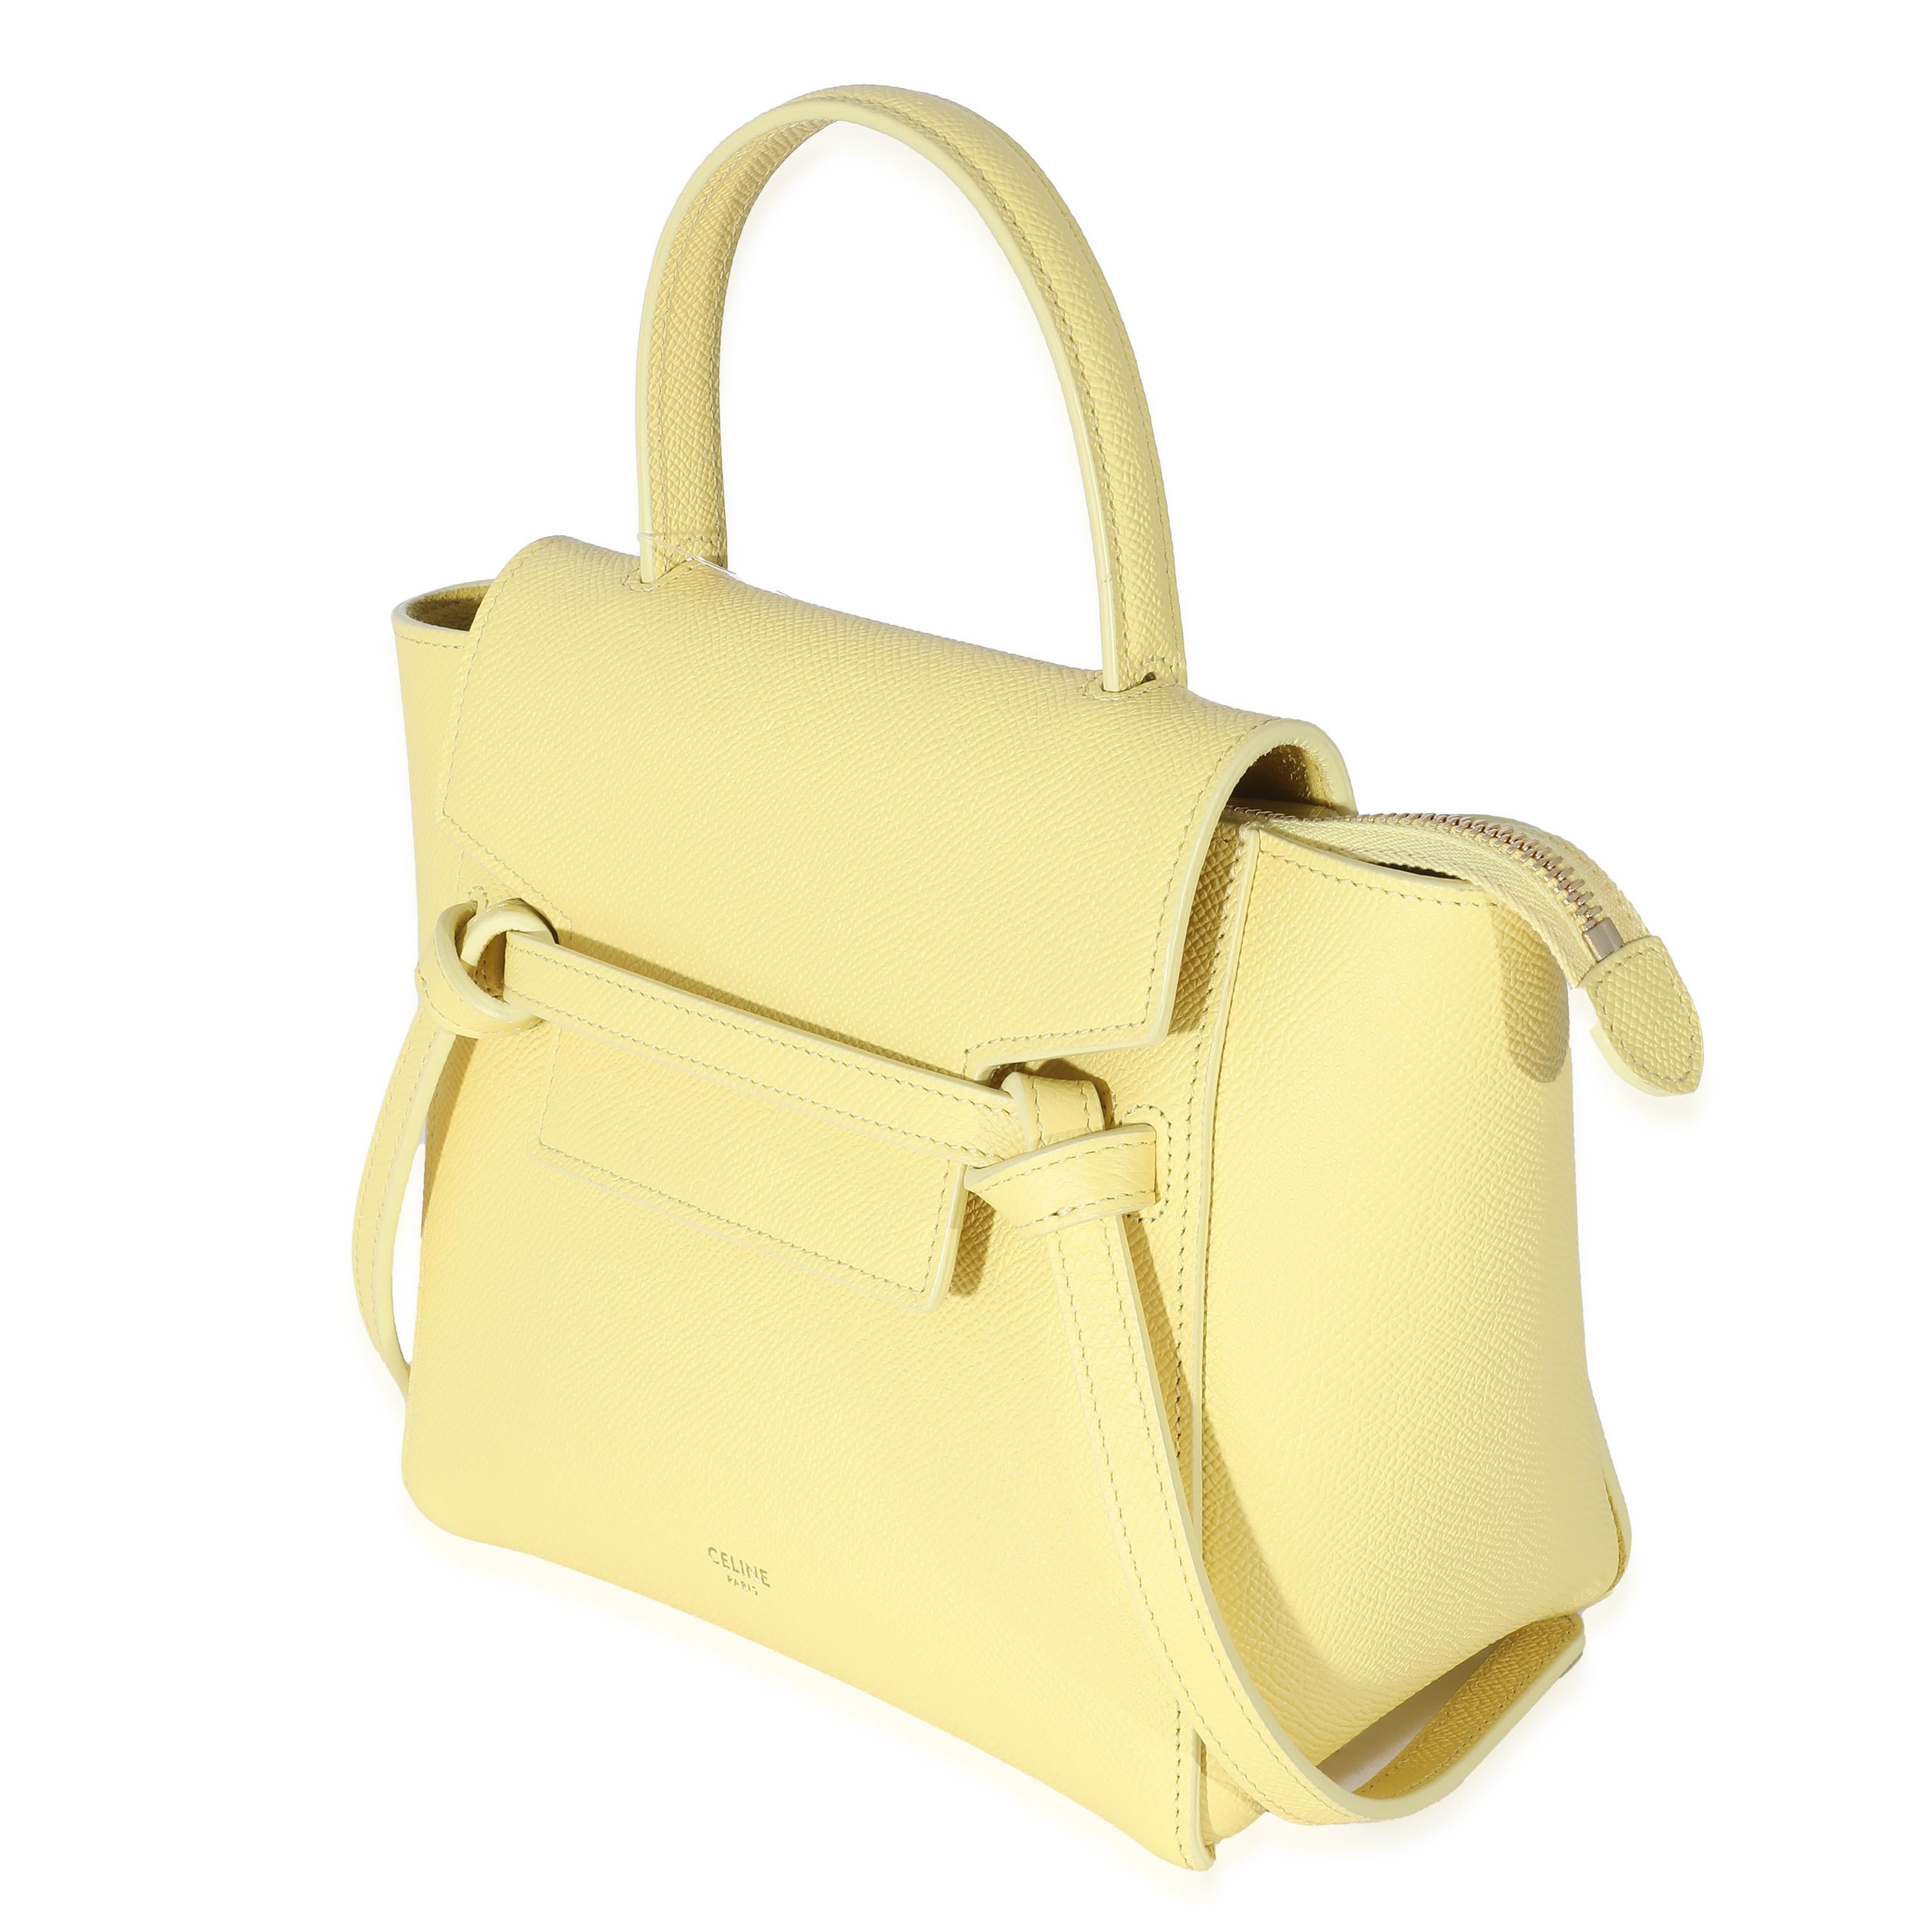 Celine Citron Grained Calfskin Nano Belt Bag In Excellent Condition For Sale In New York, NY